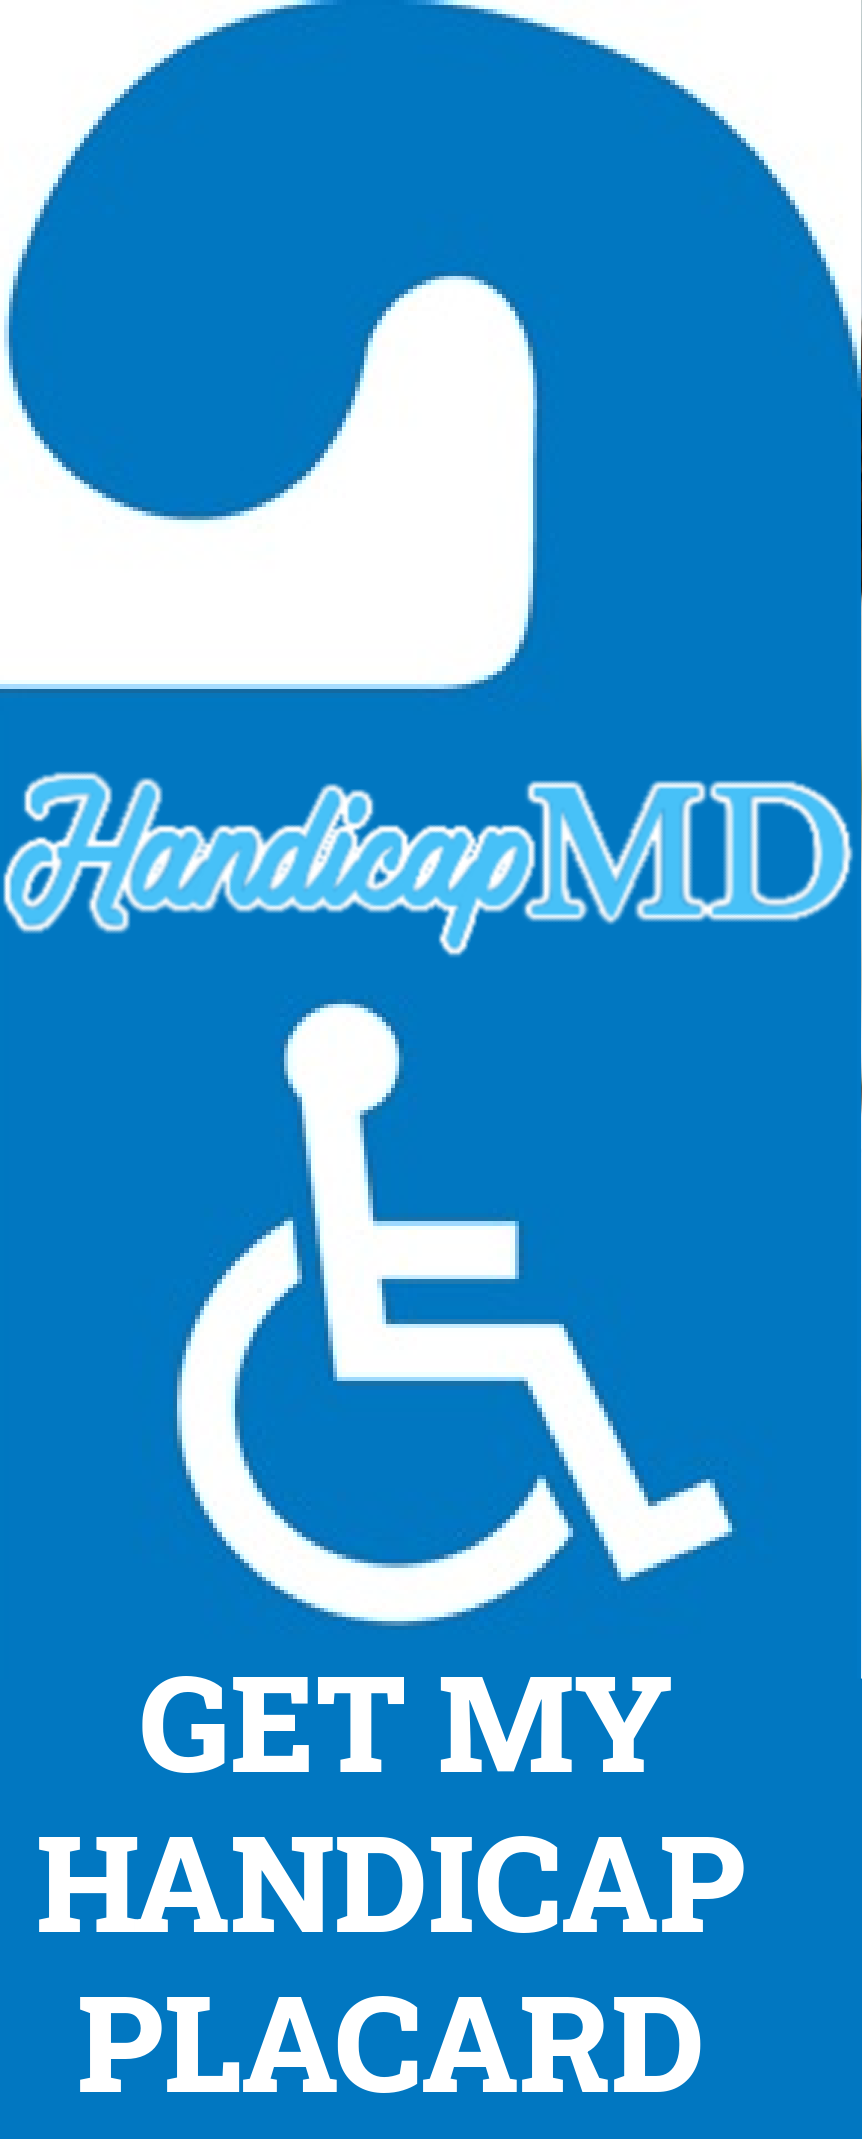 How to Replace a Lost or Stolen Handicap Placard in Hawaii